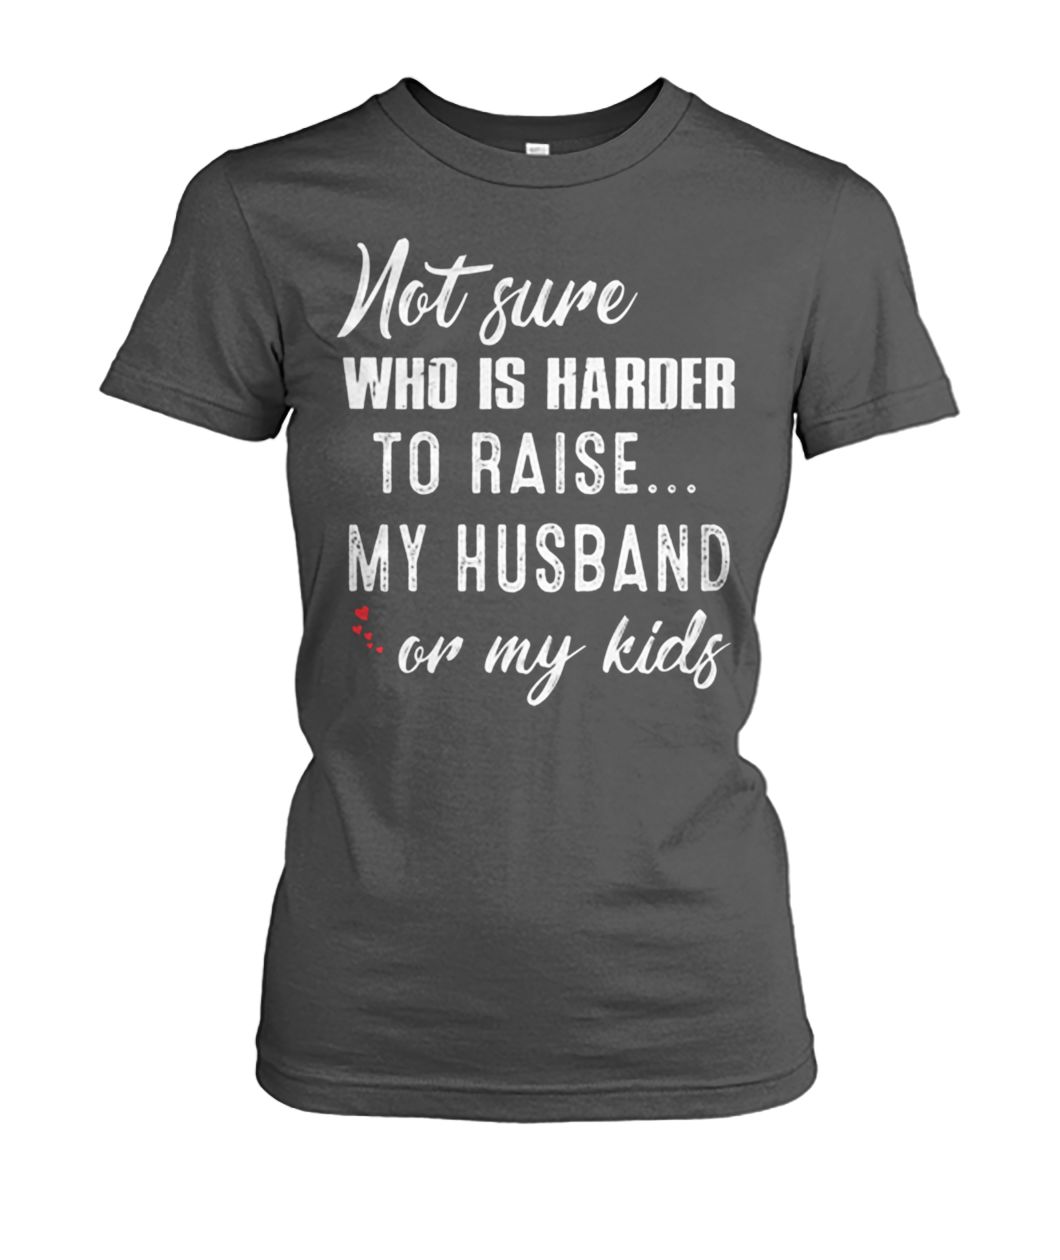 Not sure who is harder to raise my husband or my kids women's crew tee